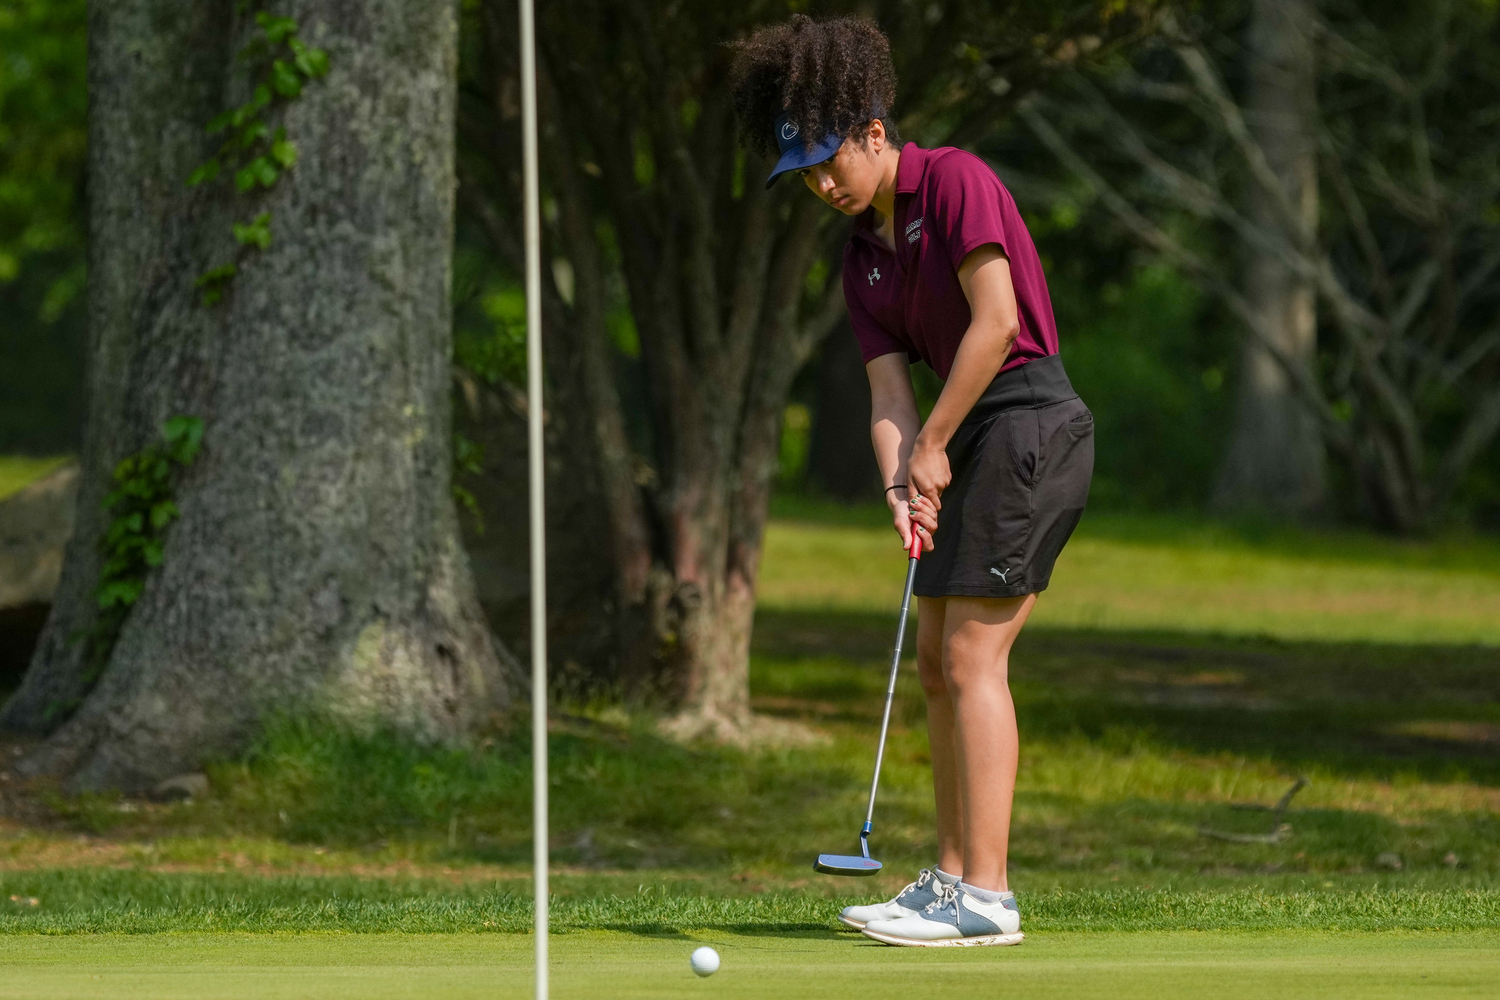 Southampton senior Ella Coady putts during the Suffolk County Girls Golf Championships at Middle Island Golf Club on Tuesday.   RON ESPOSITO